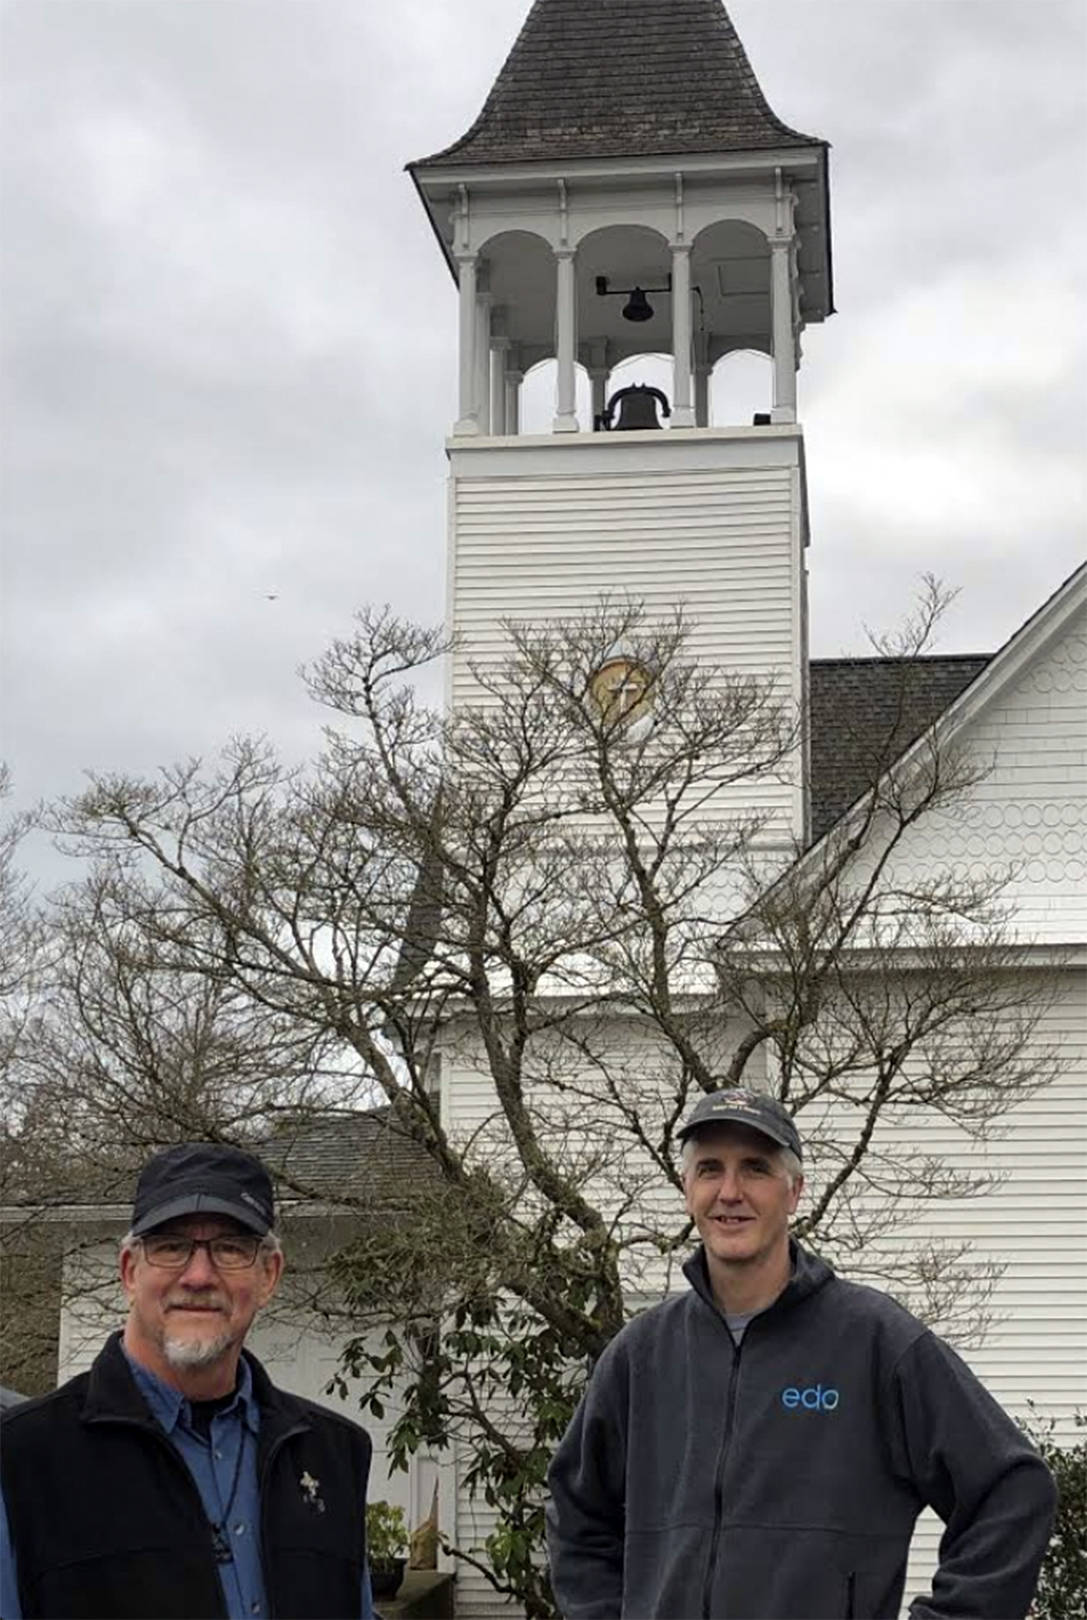 Jim MacphersonJ and David Beemer in front of the large church bell. Courtesy photo